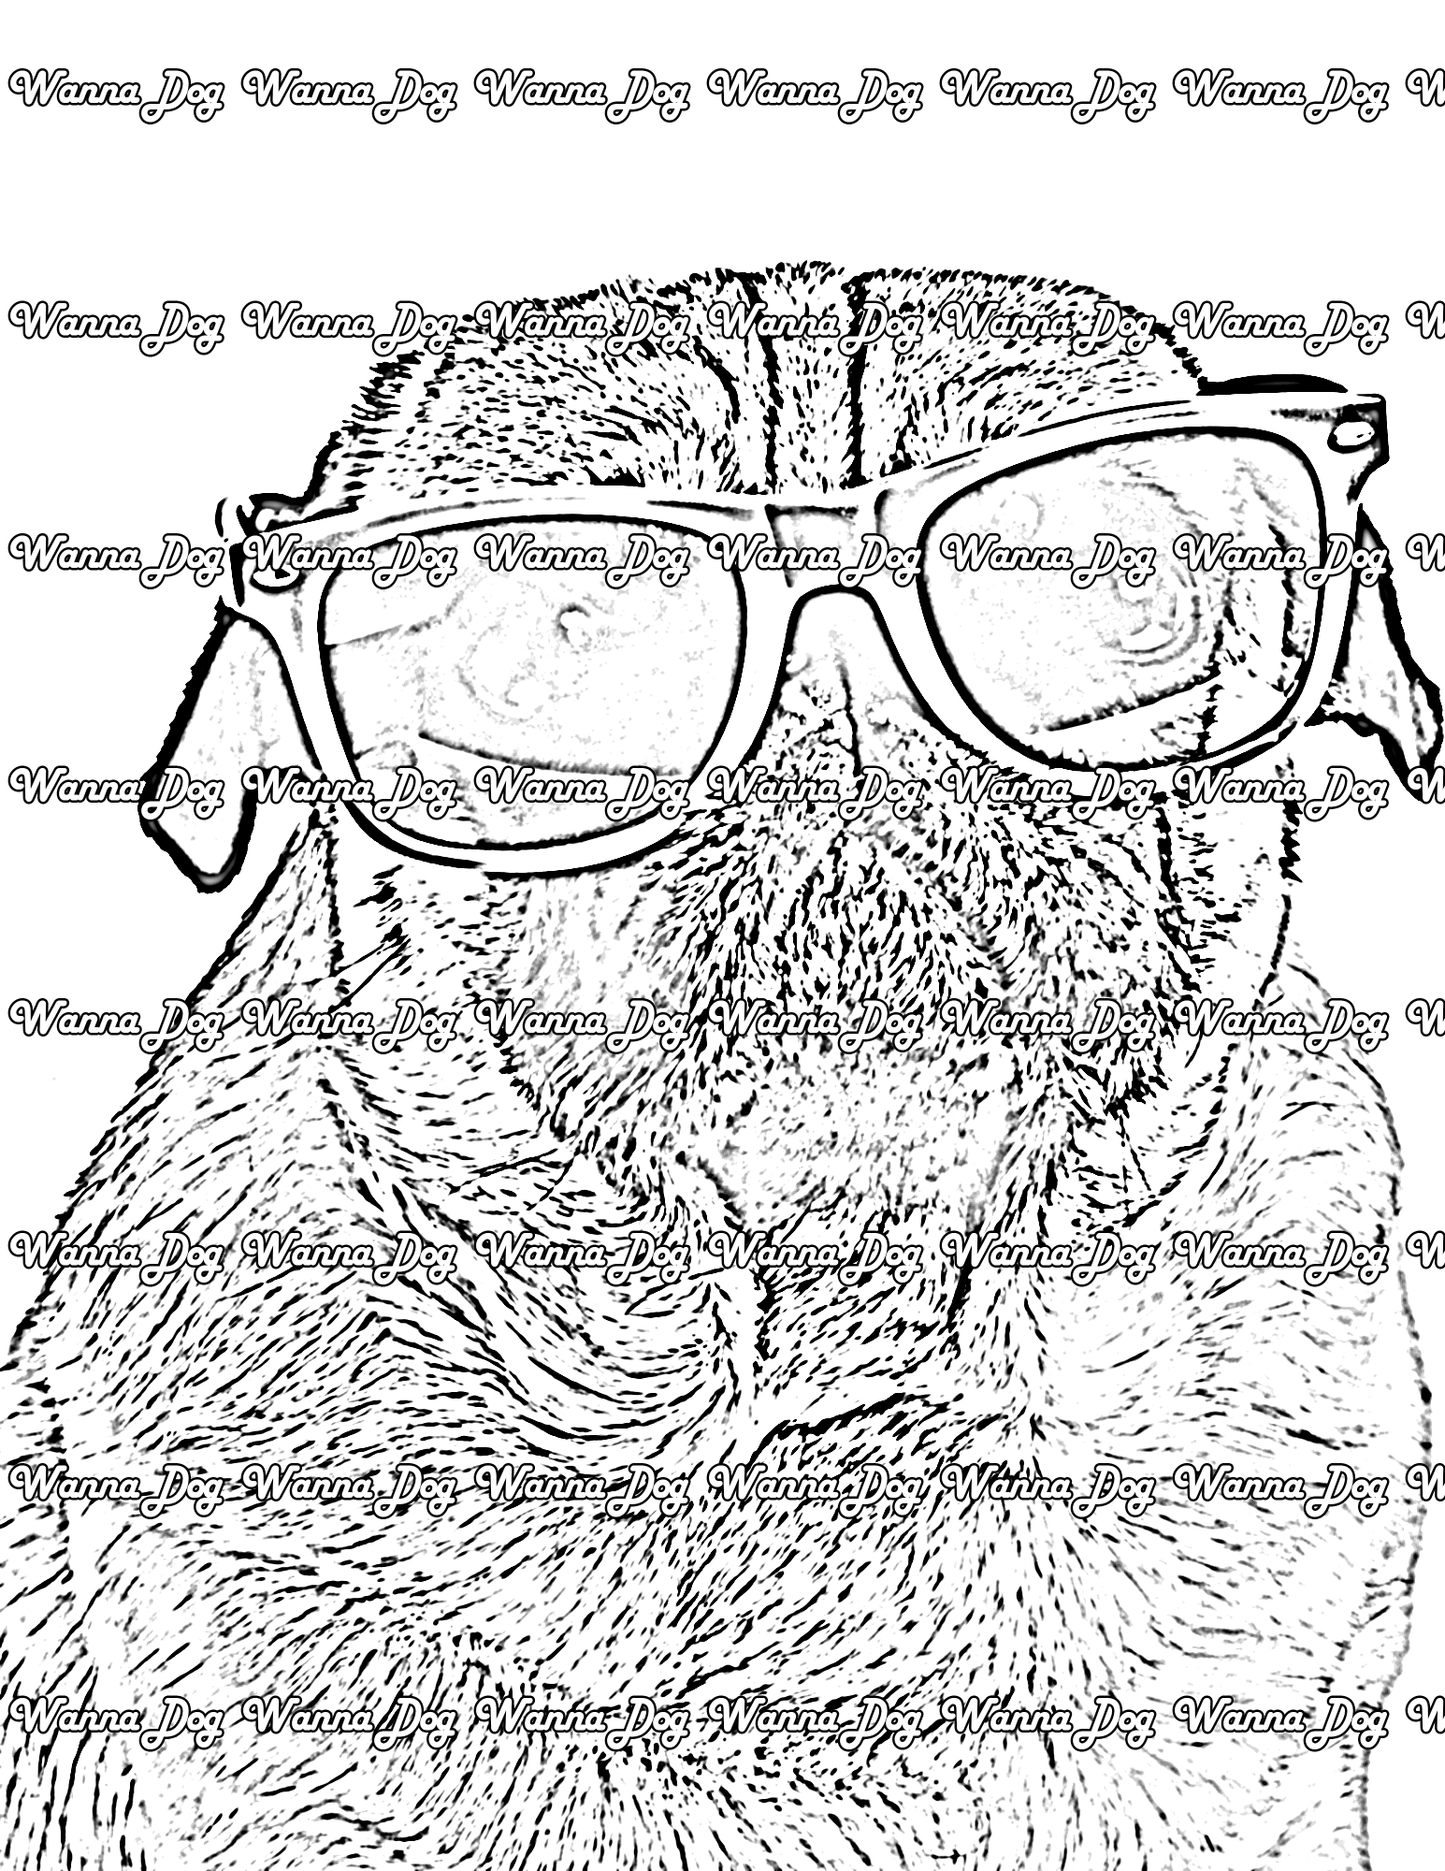 A Pug Coloring Page of a pug wearing sunglasses